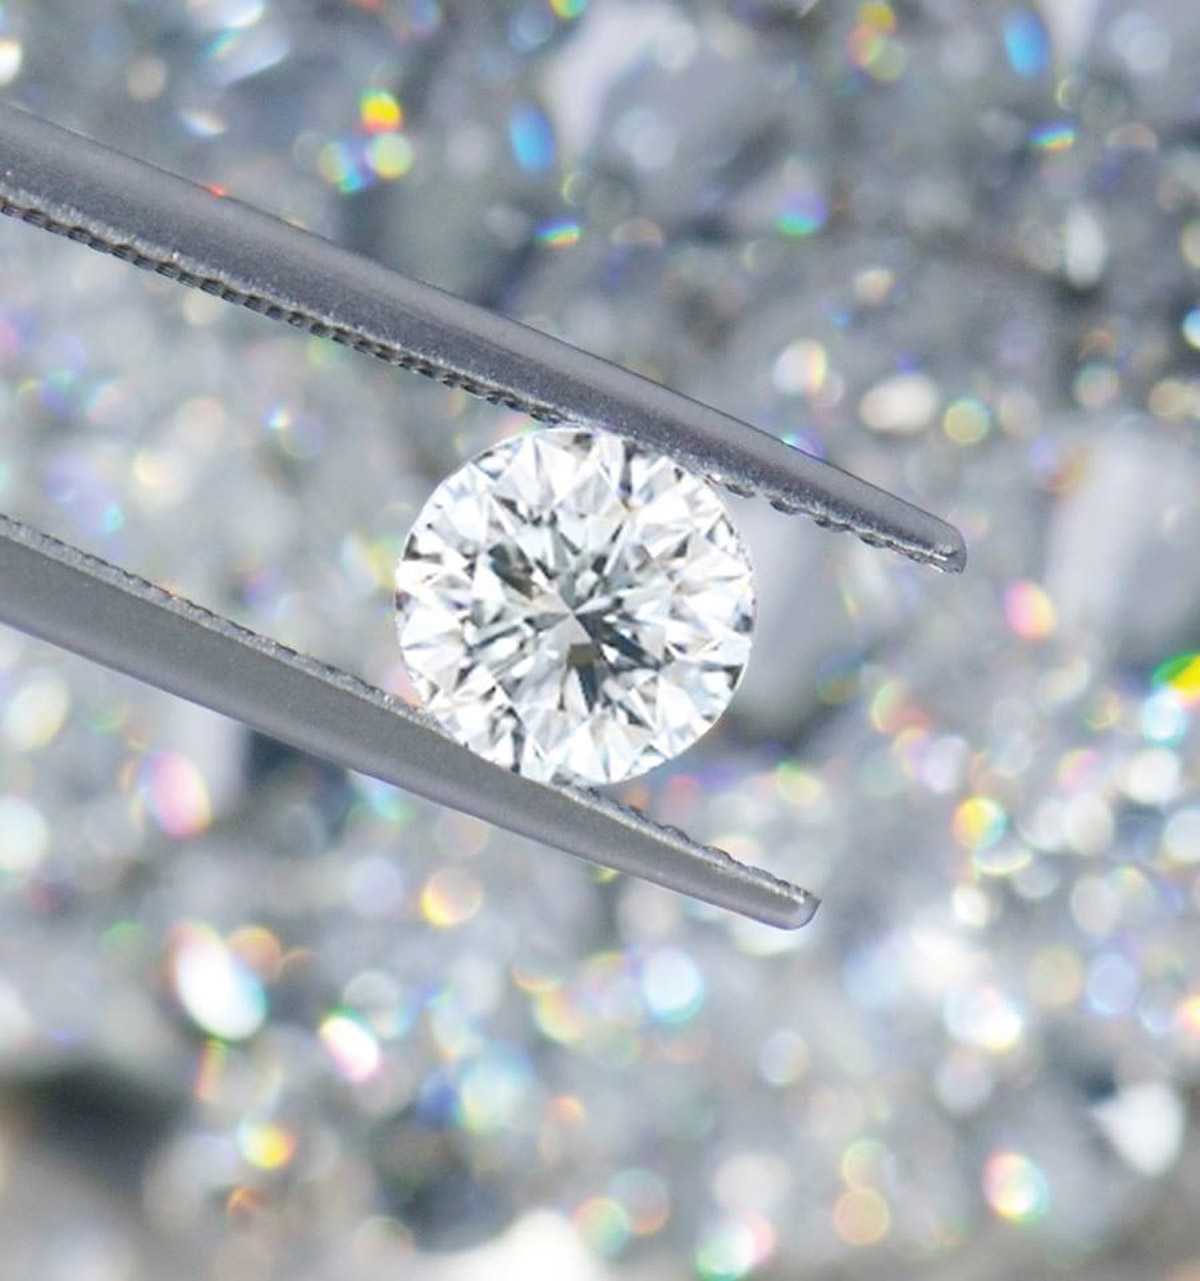 The 3-Step Guide to Customising Your Diamond Ring